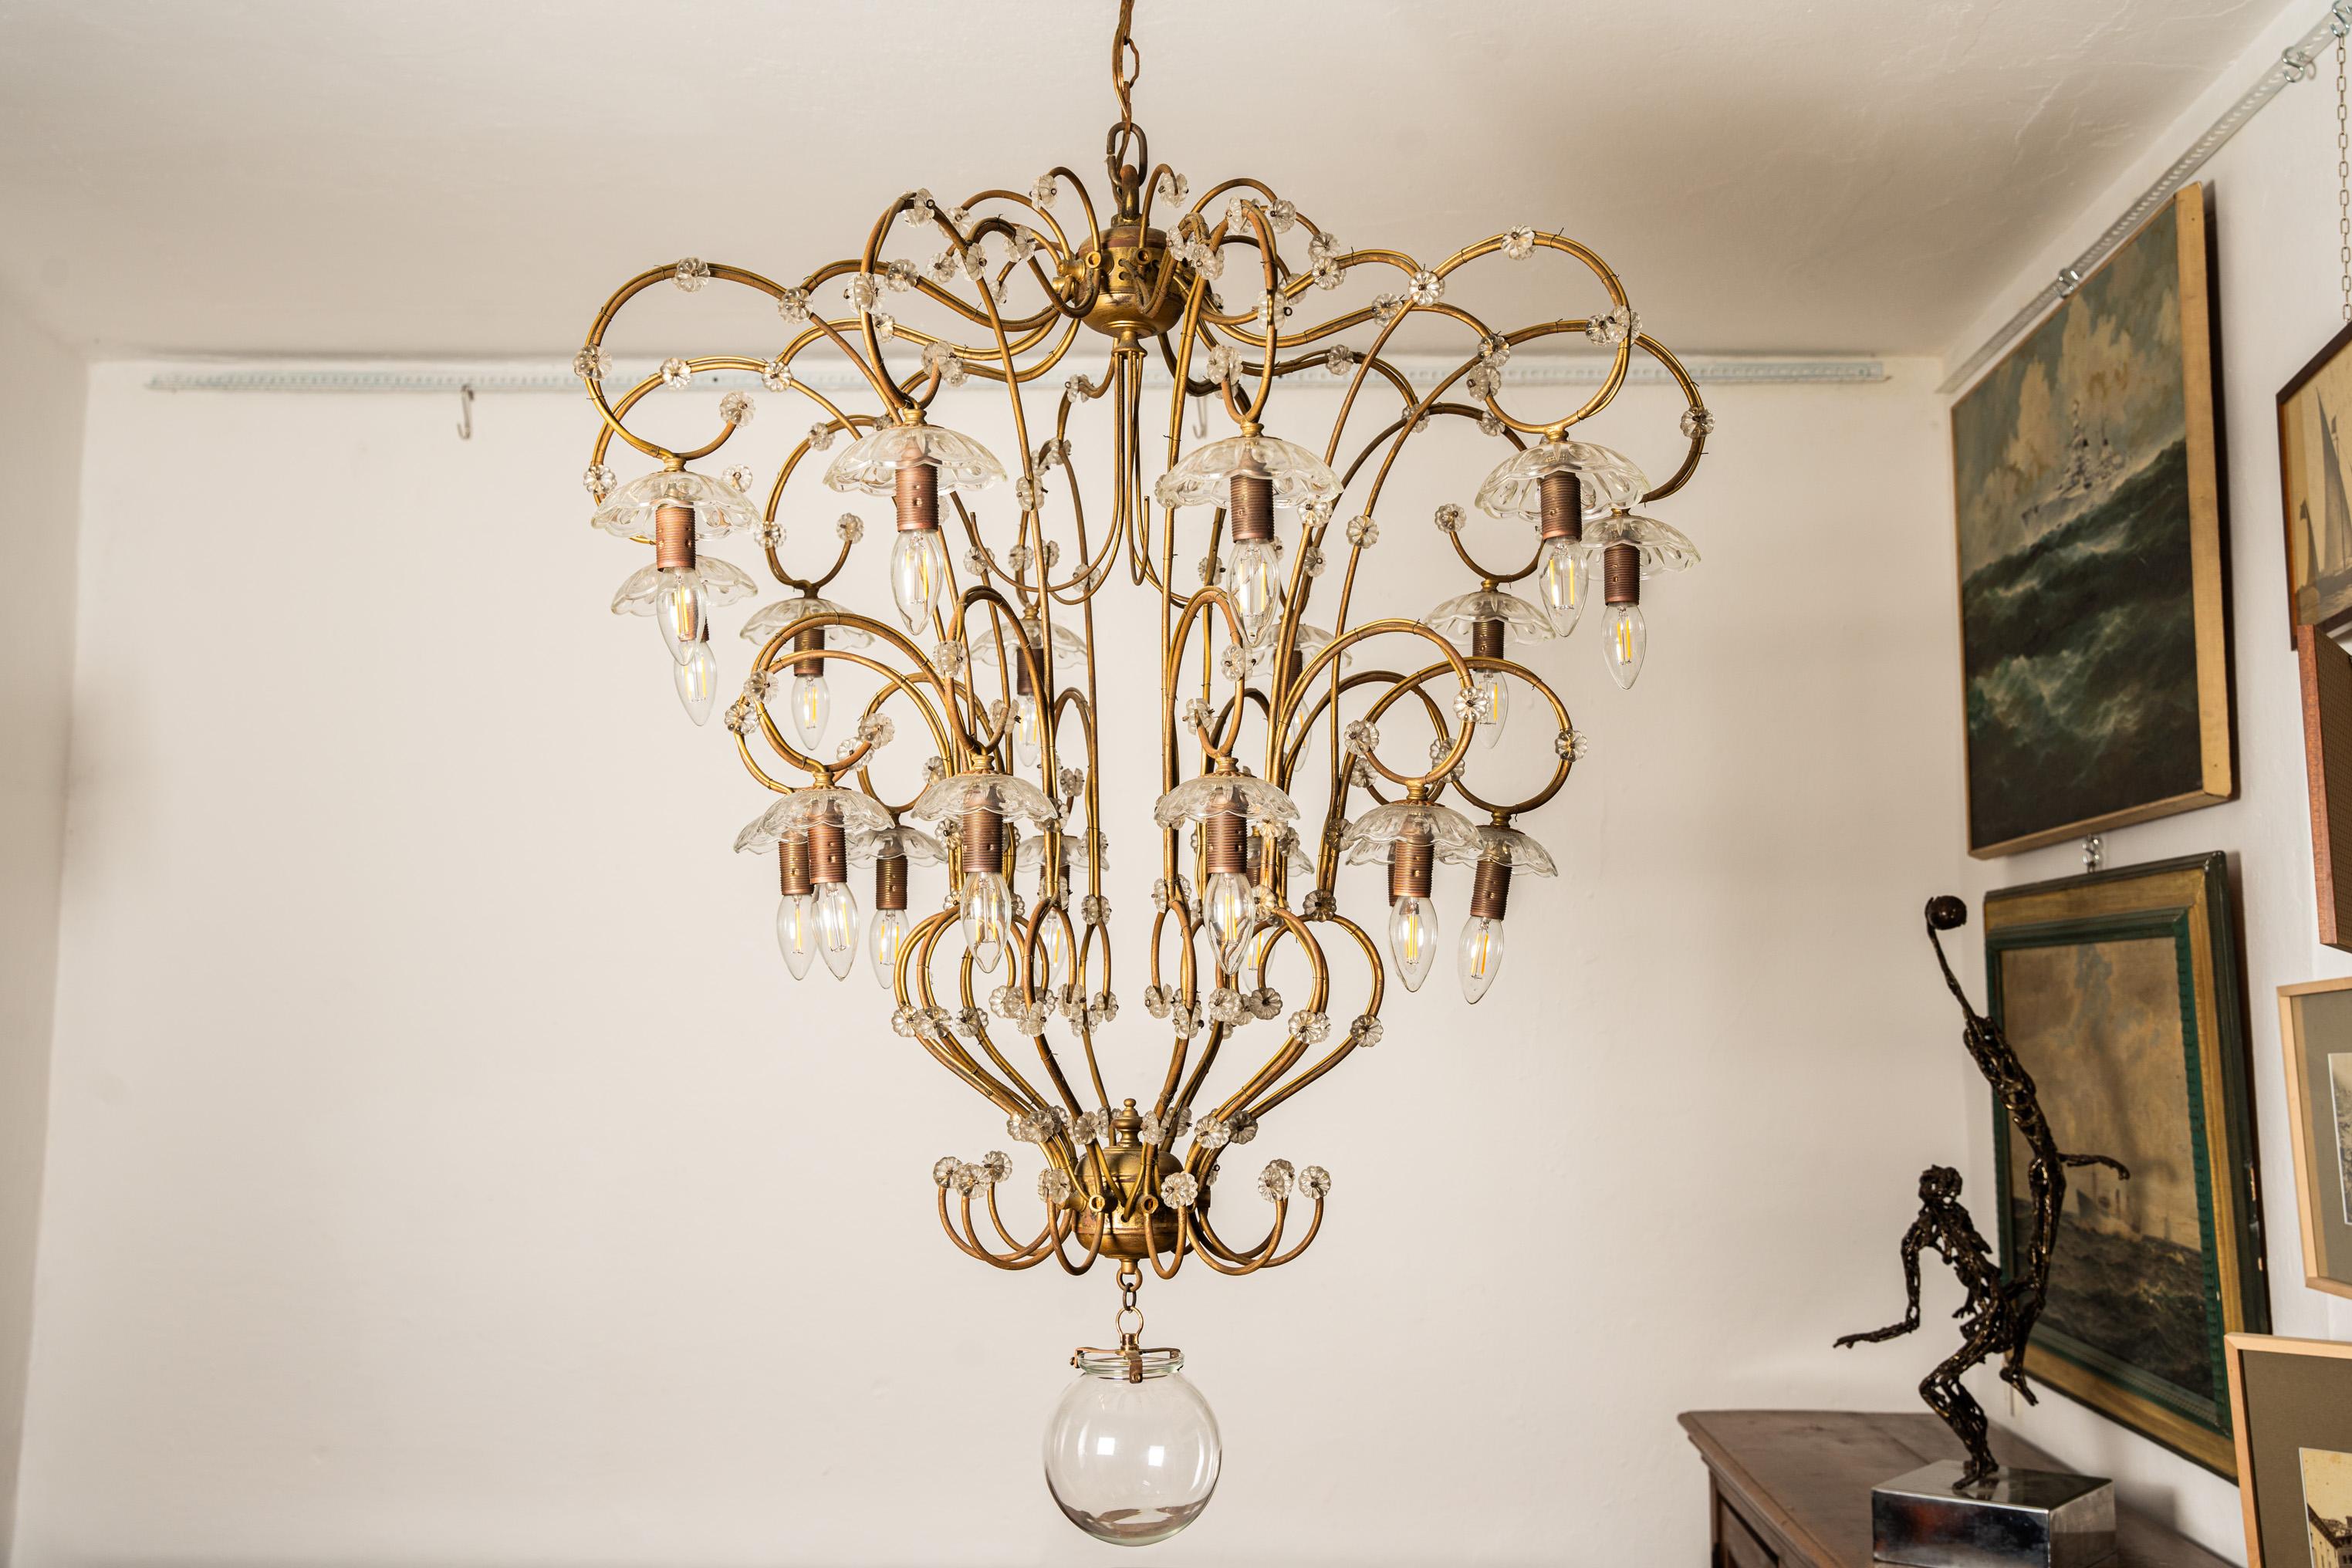 Important brass chandelier chandelier with 10 arms and 20 lights 
Decorated with glass candle holder and flowers